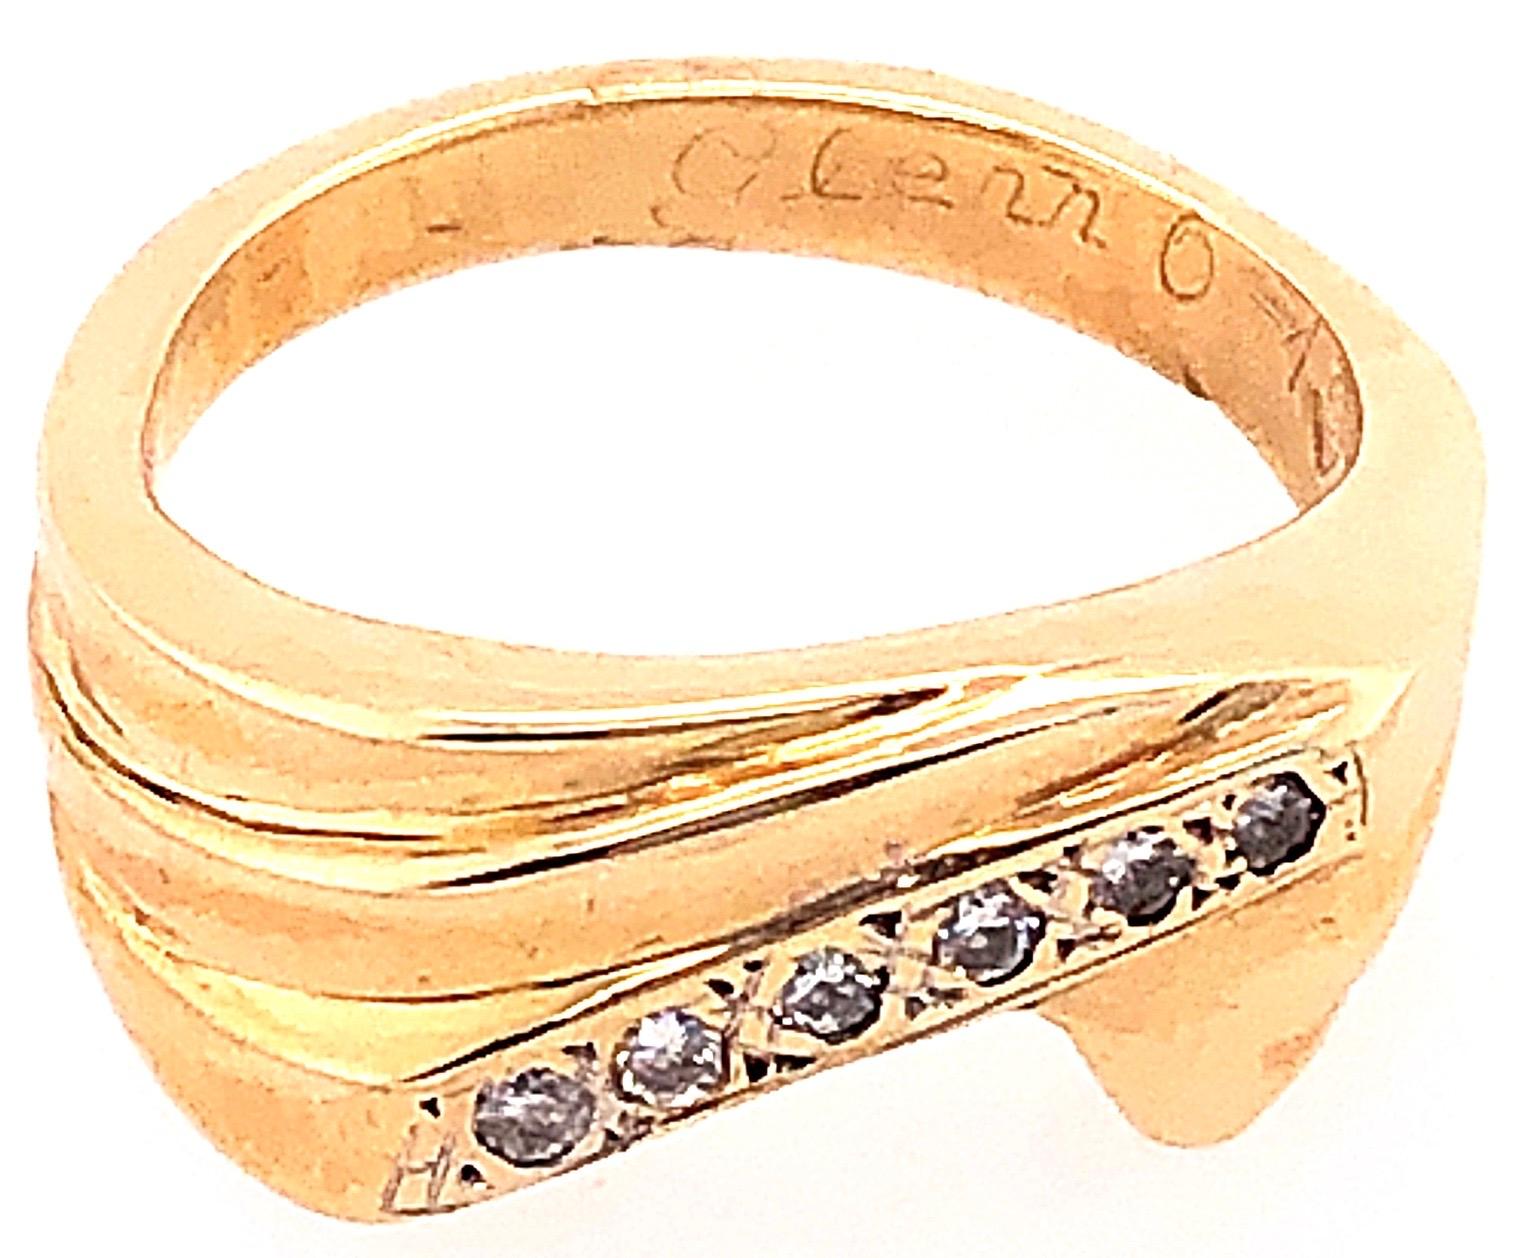 14 Karat Yellow Gold And Diamond Free Form Ring Size 6.25.
0.30 total diamond weight.
7.76 grams total weight.